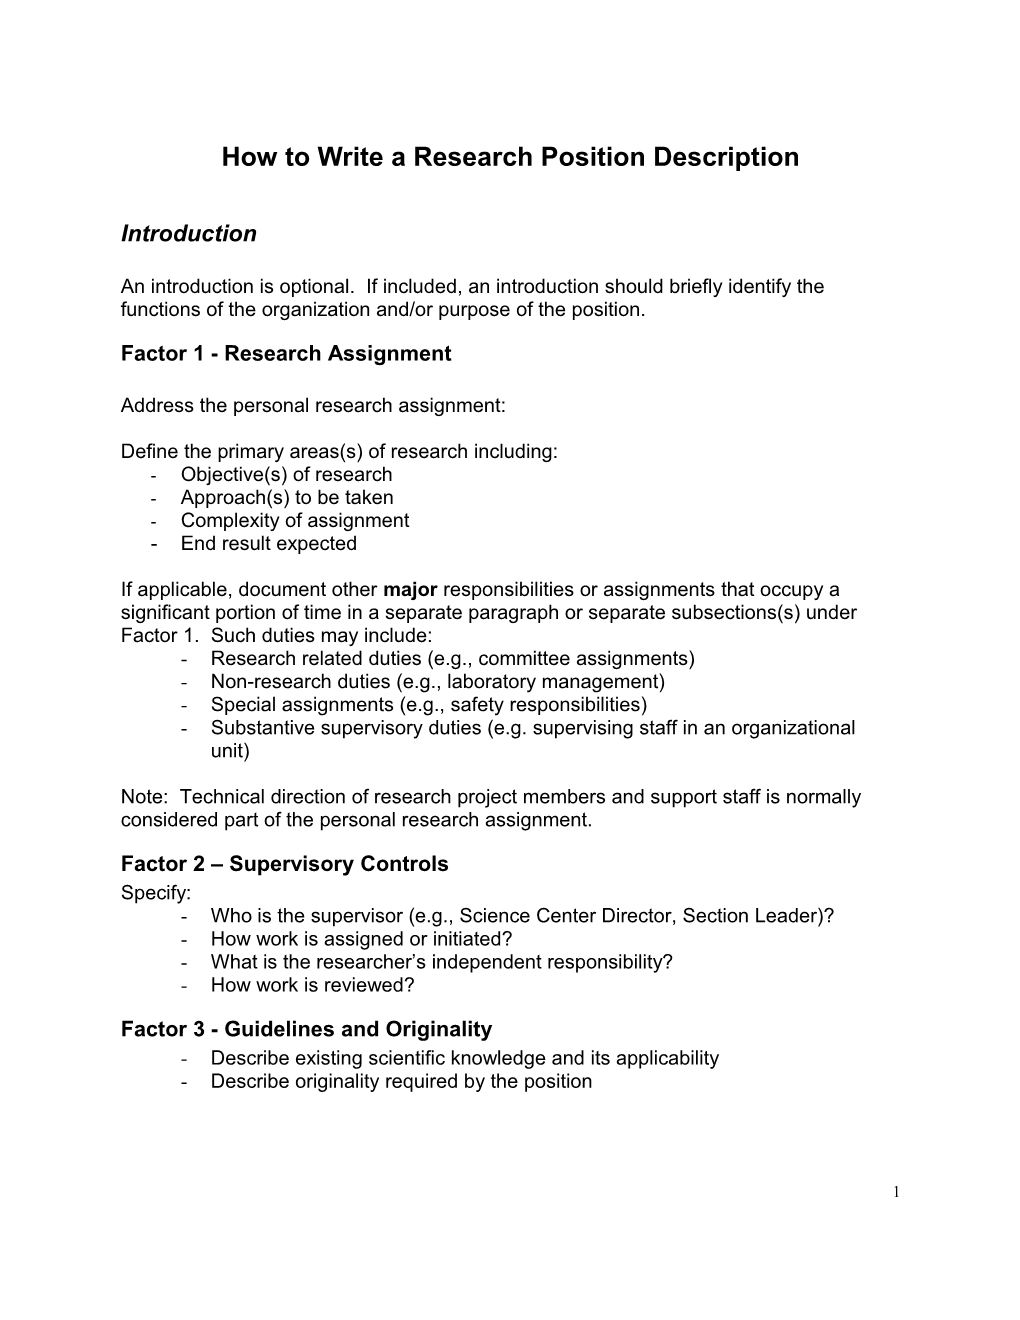 Draft - How to Write a Research Position Description